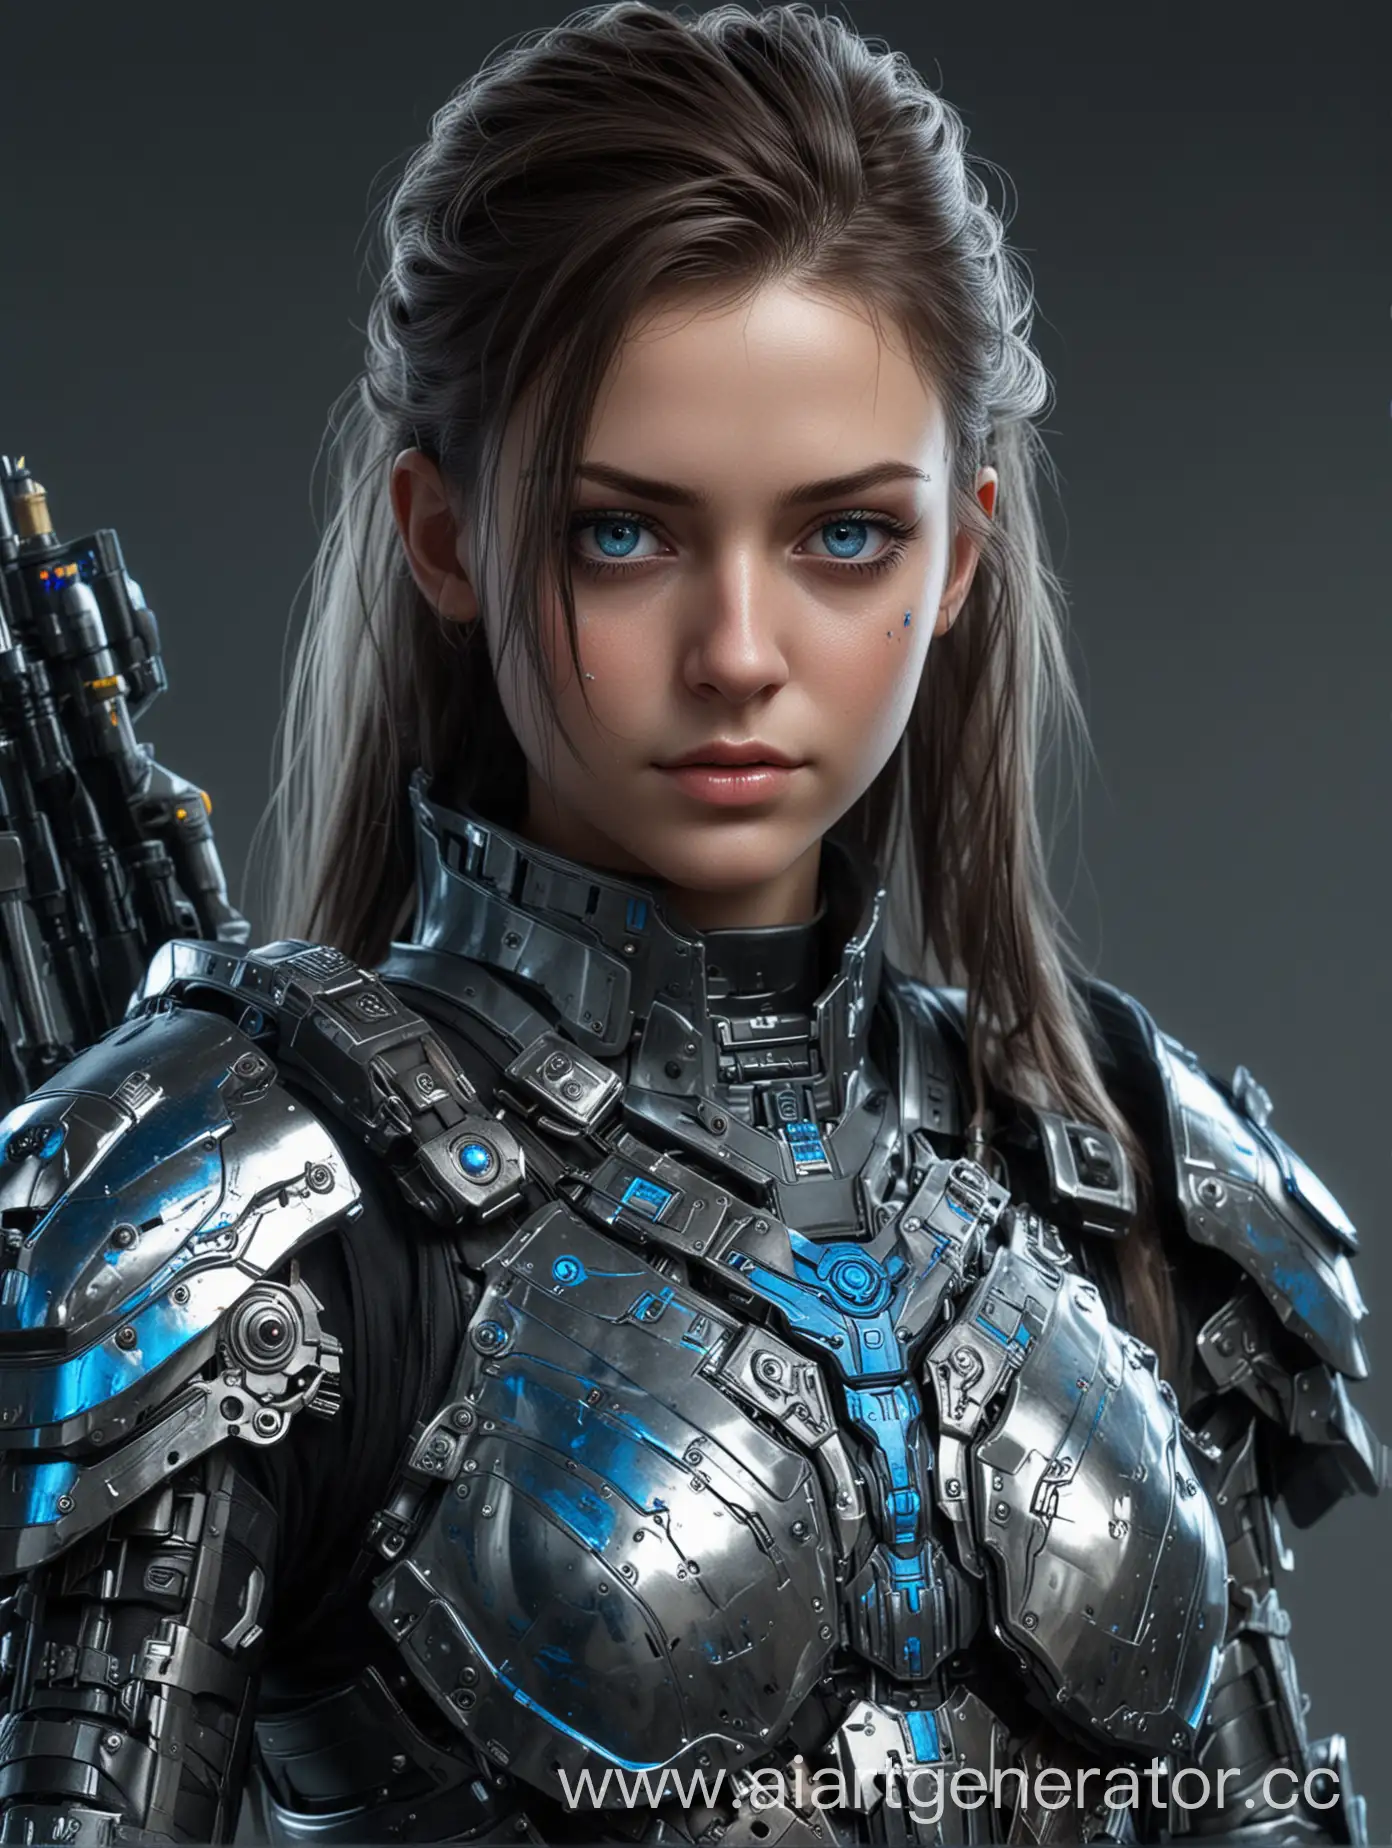 Cyberpunk girl with blue eyes dressed in imperial shiny armor with a crossbow